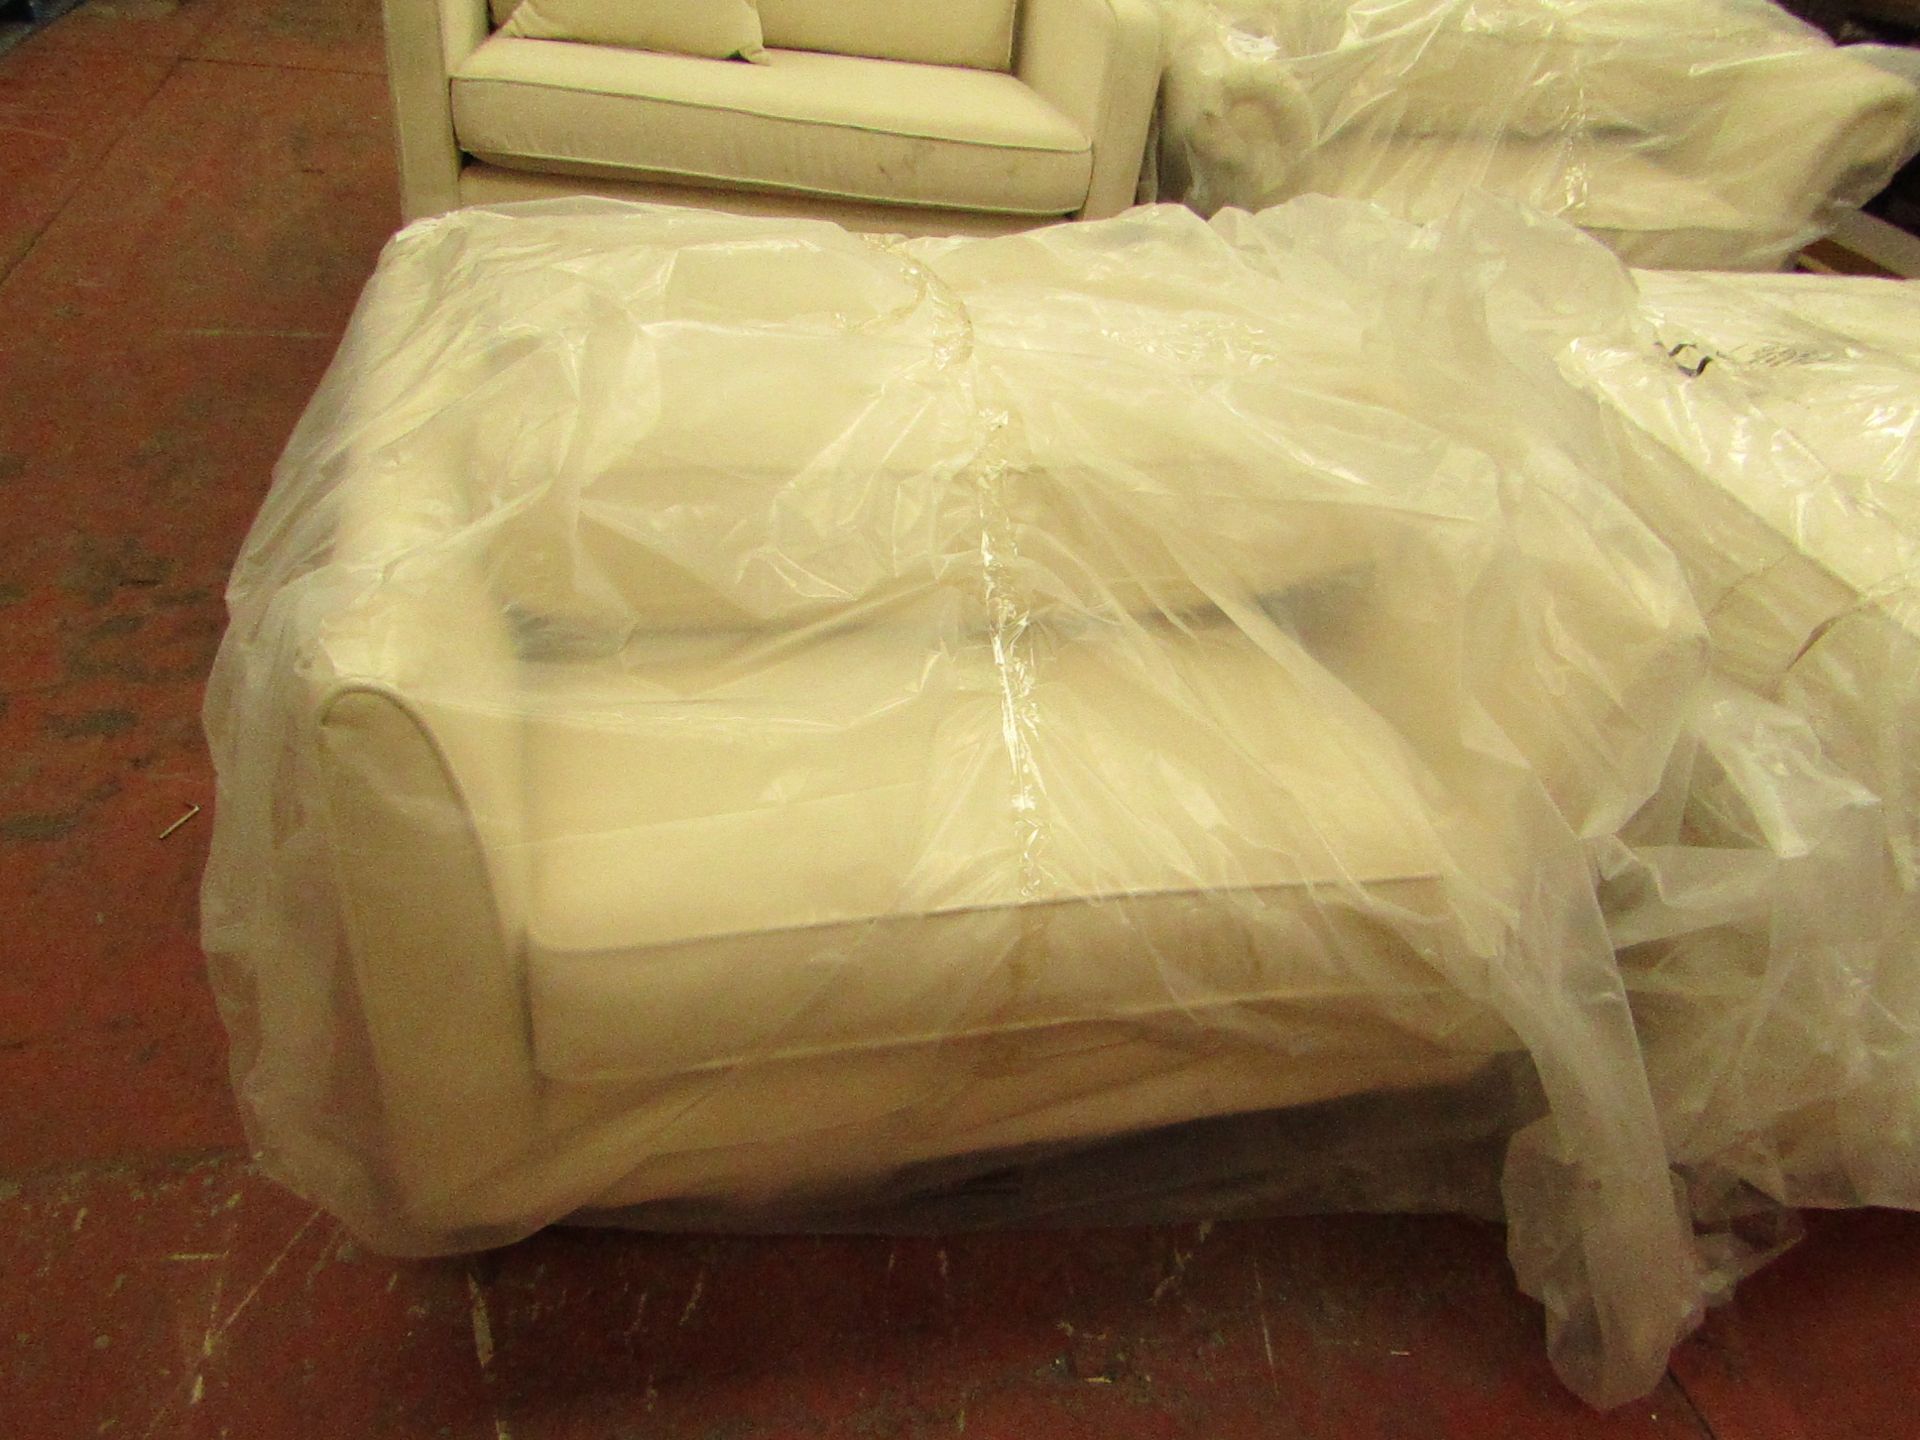 White Meadow Snuggle Seat with Chrome Feet 1m x 1m ex-display